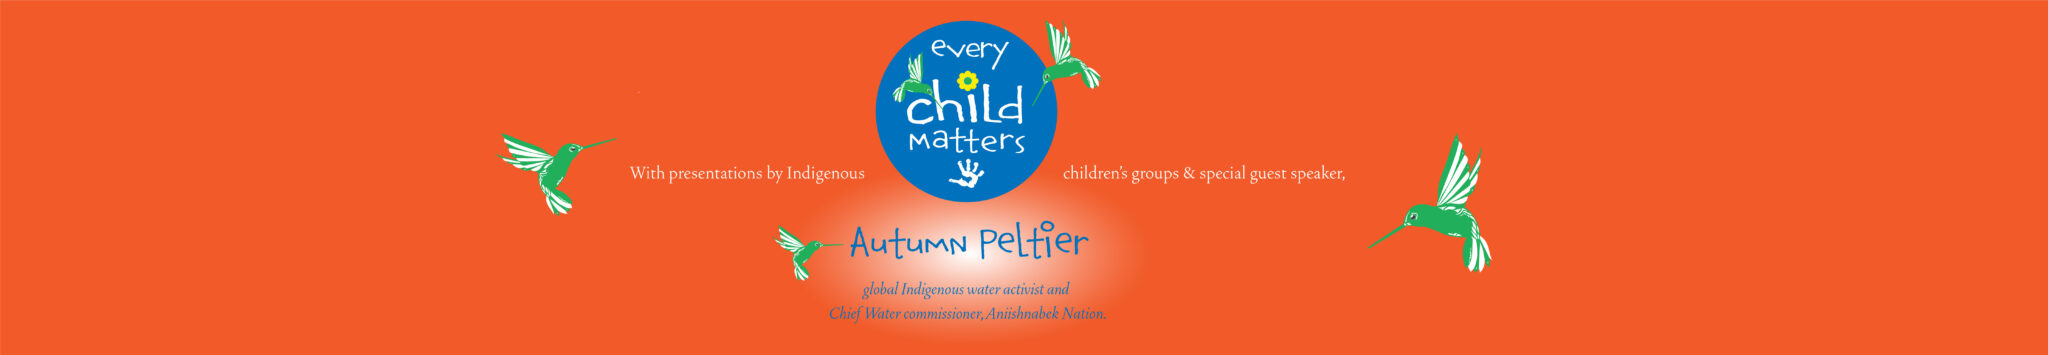 Autumn Peltier, every child matters, remember me, september 30, orange shirt day, ottawa, pass the feather, indigenous arts collective of canada, residential school, graves, remembrance day, sixties scoop, flag, fundraising, awareness,truth and reconciliation